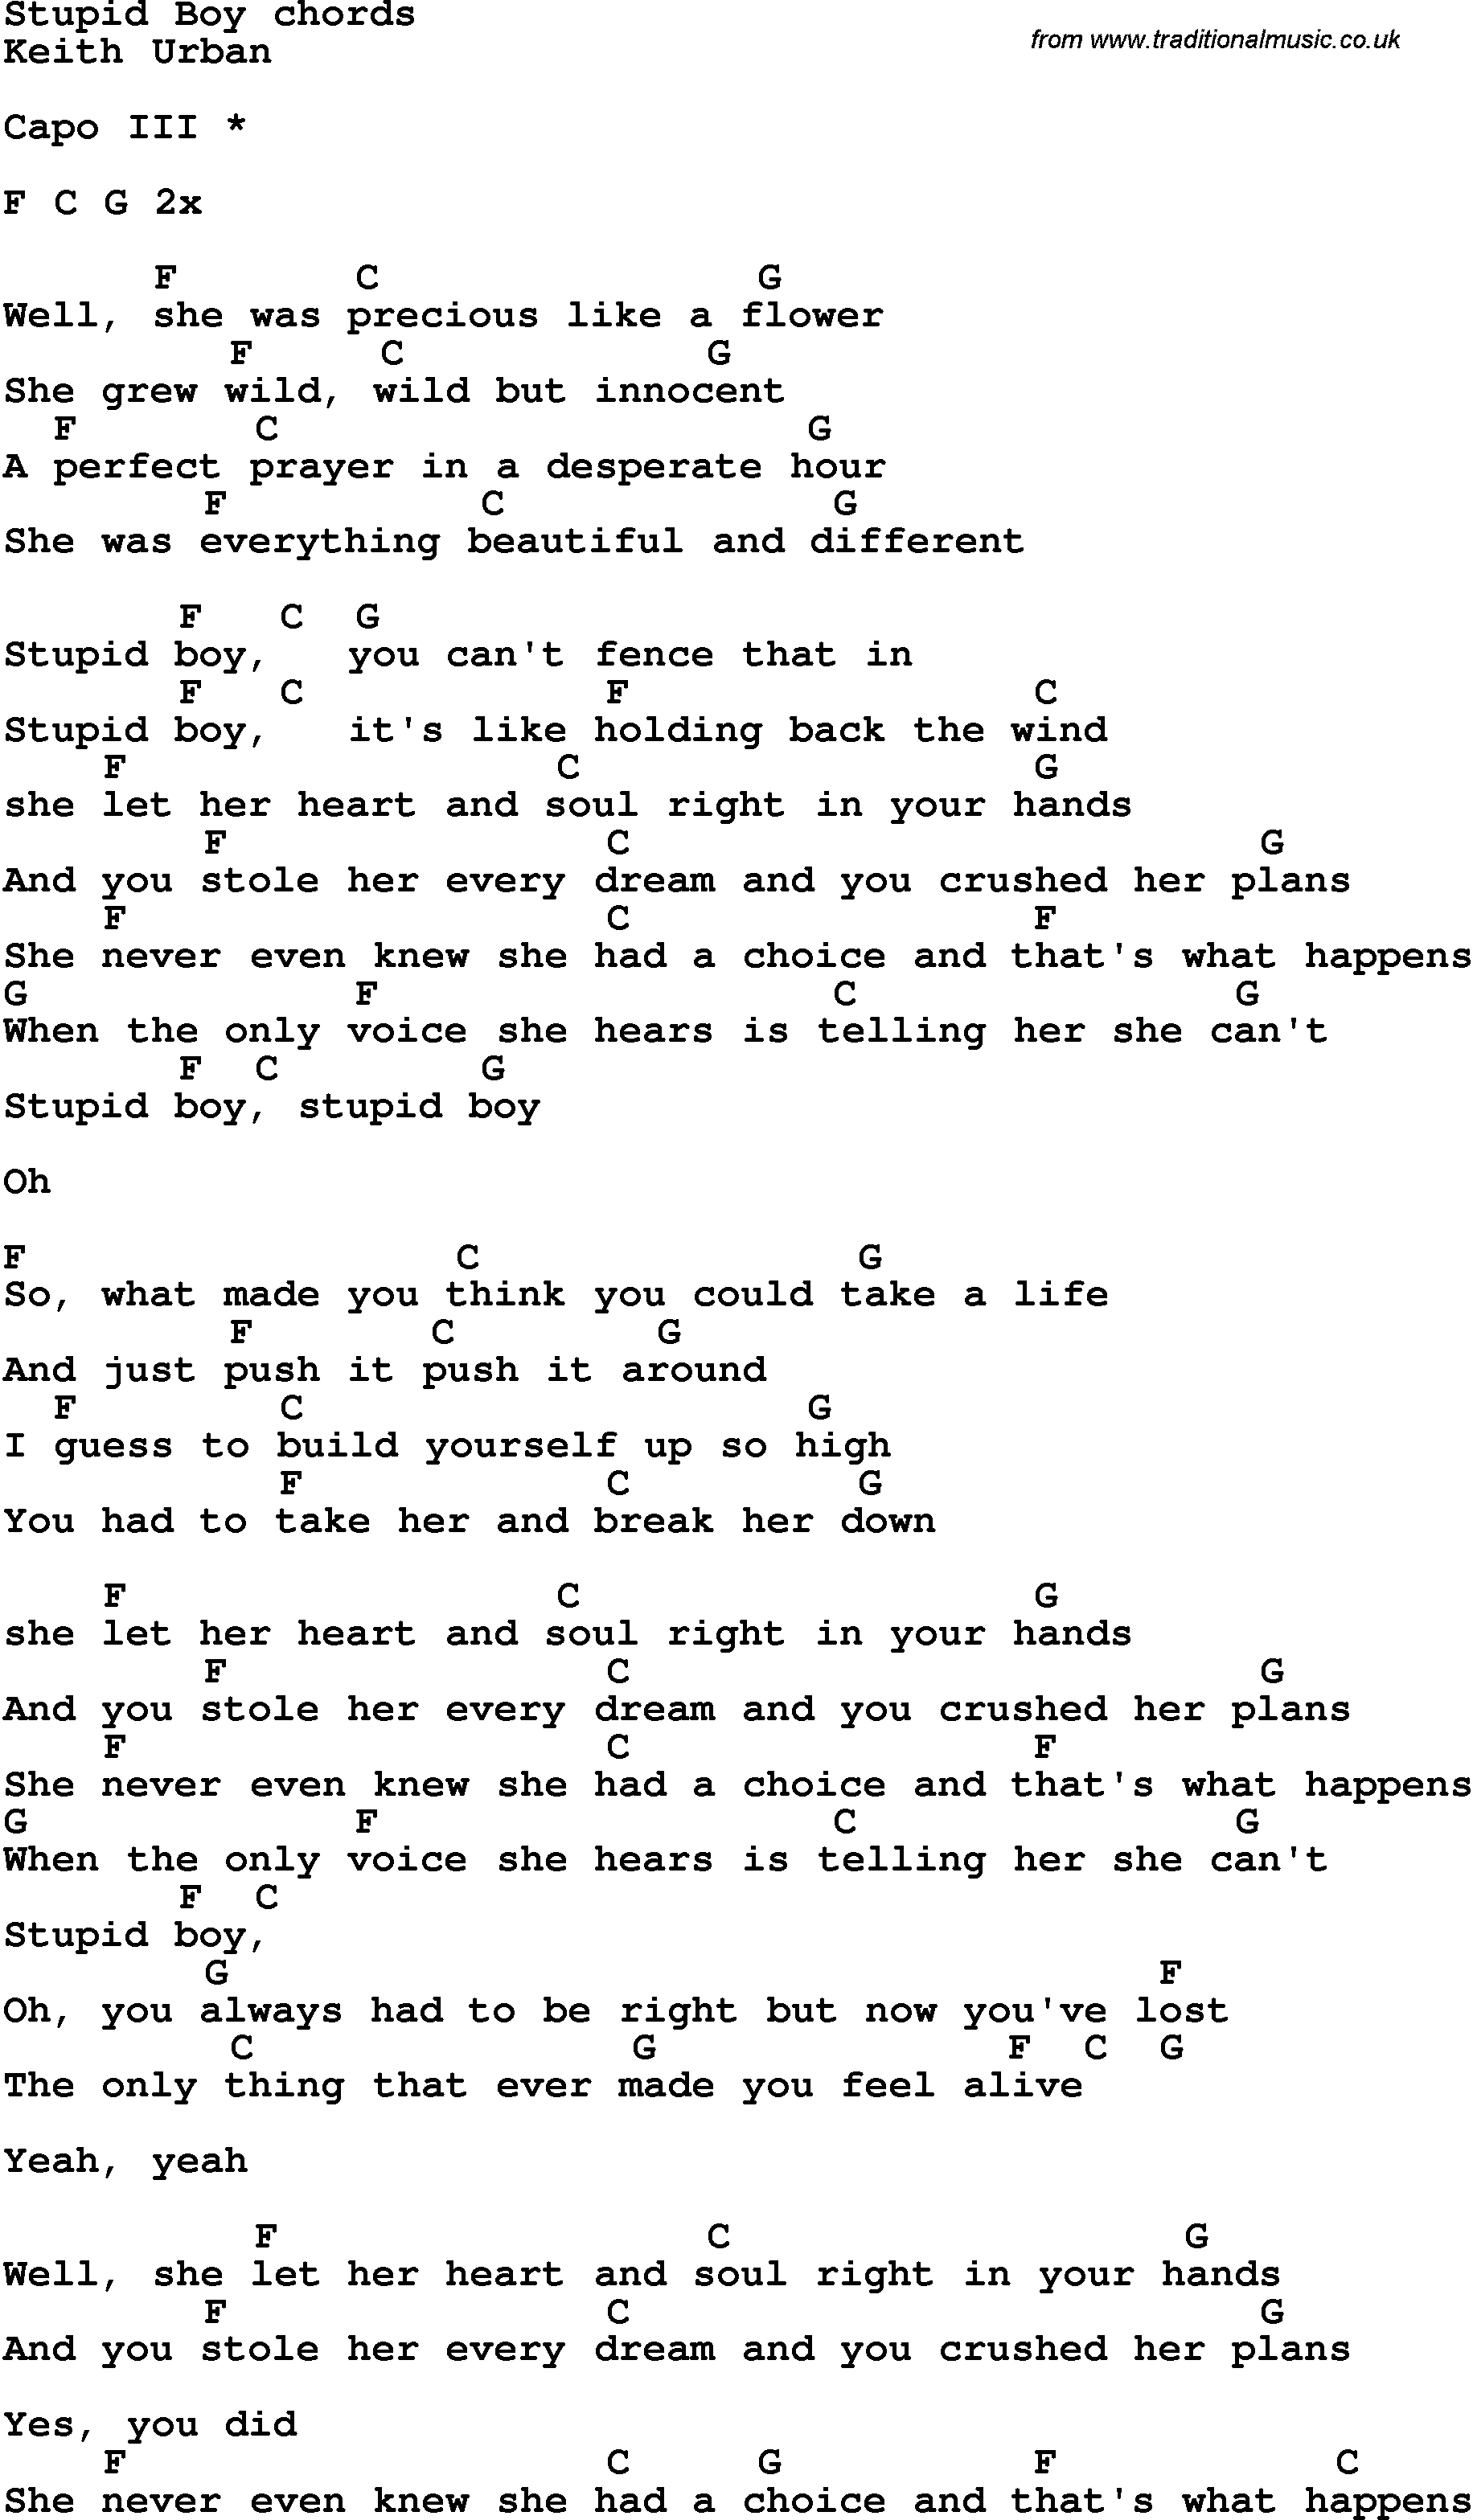 Song Lyrics with guitar chords for Stupid Boy